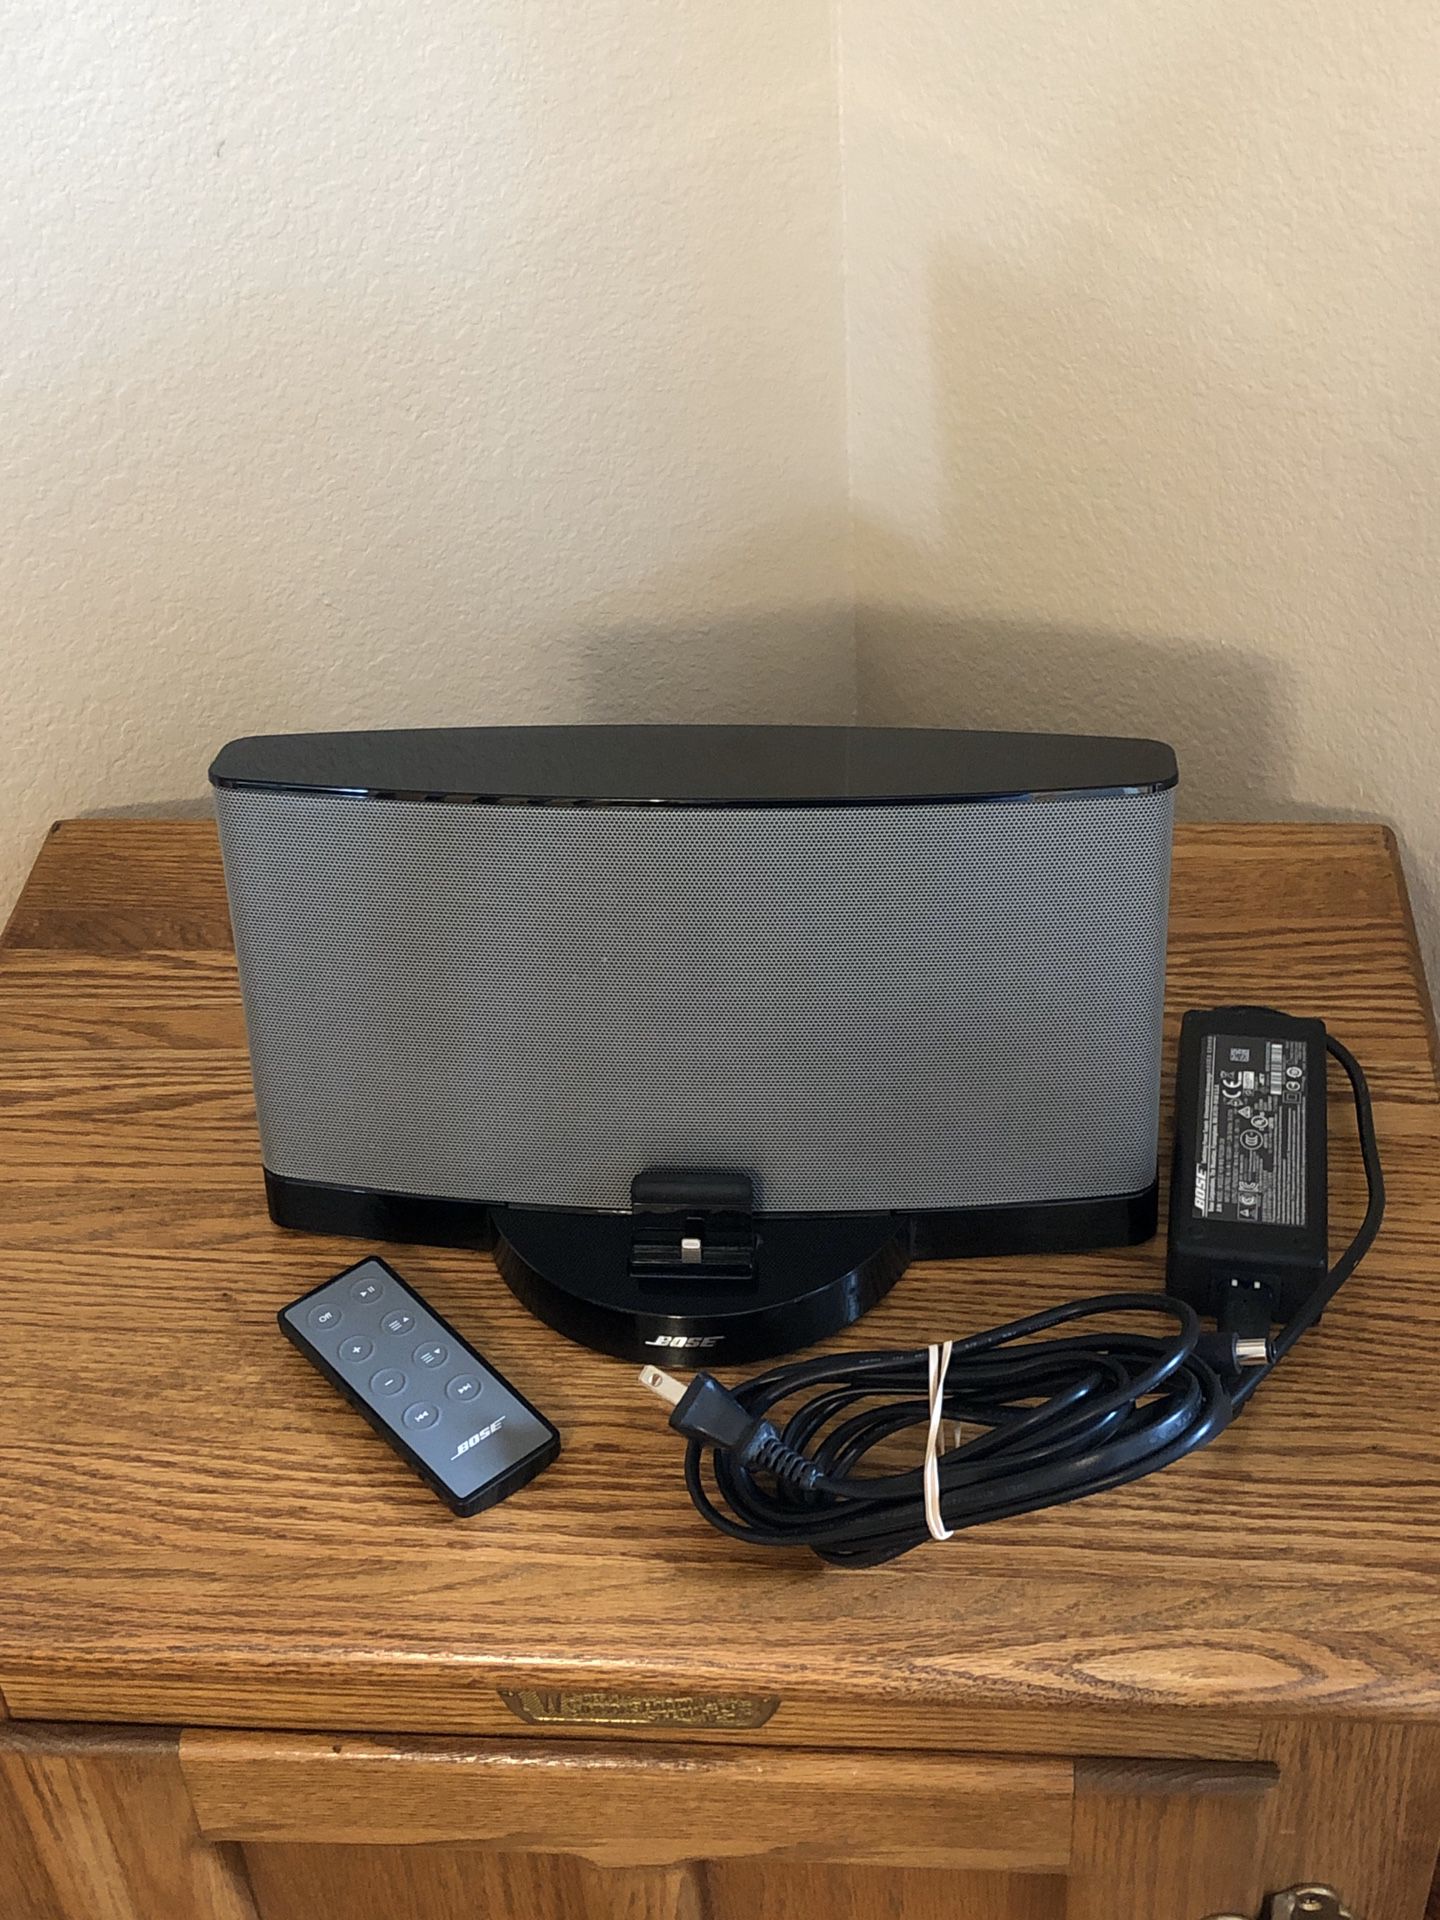 BOSE SoundDock Series III Digital Music System with Lightning Connector & Remote